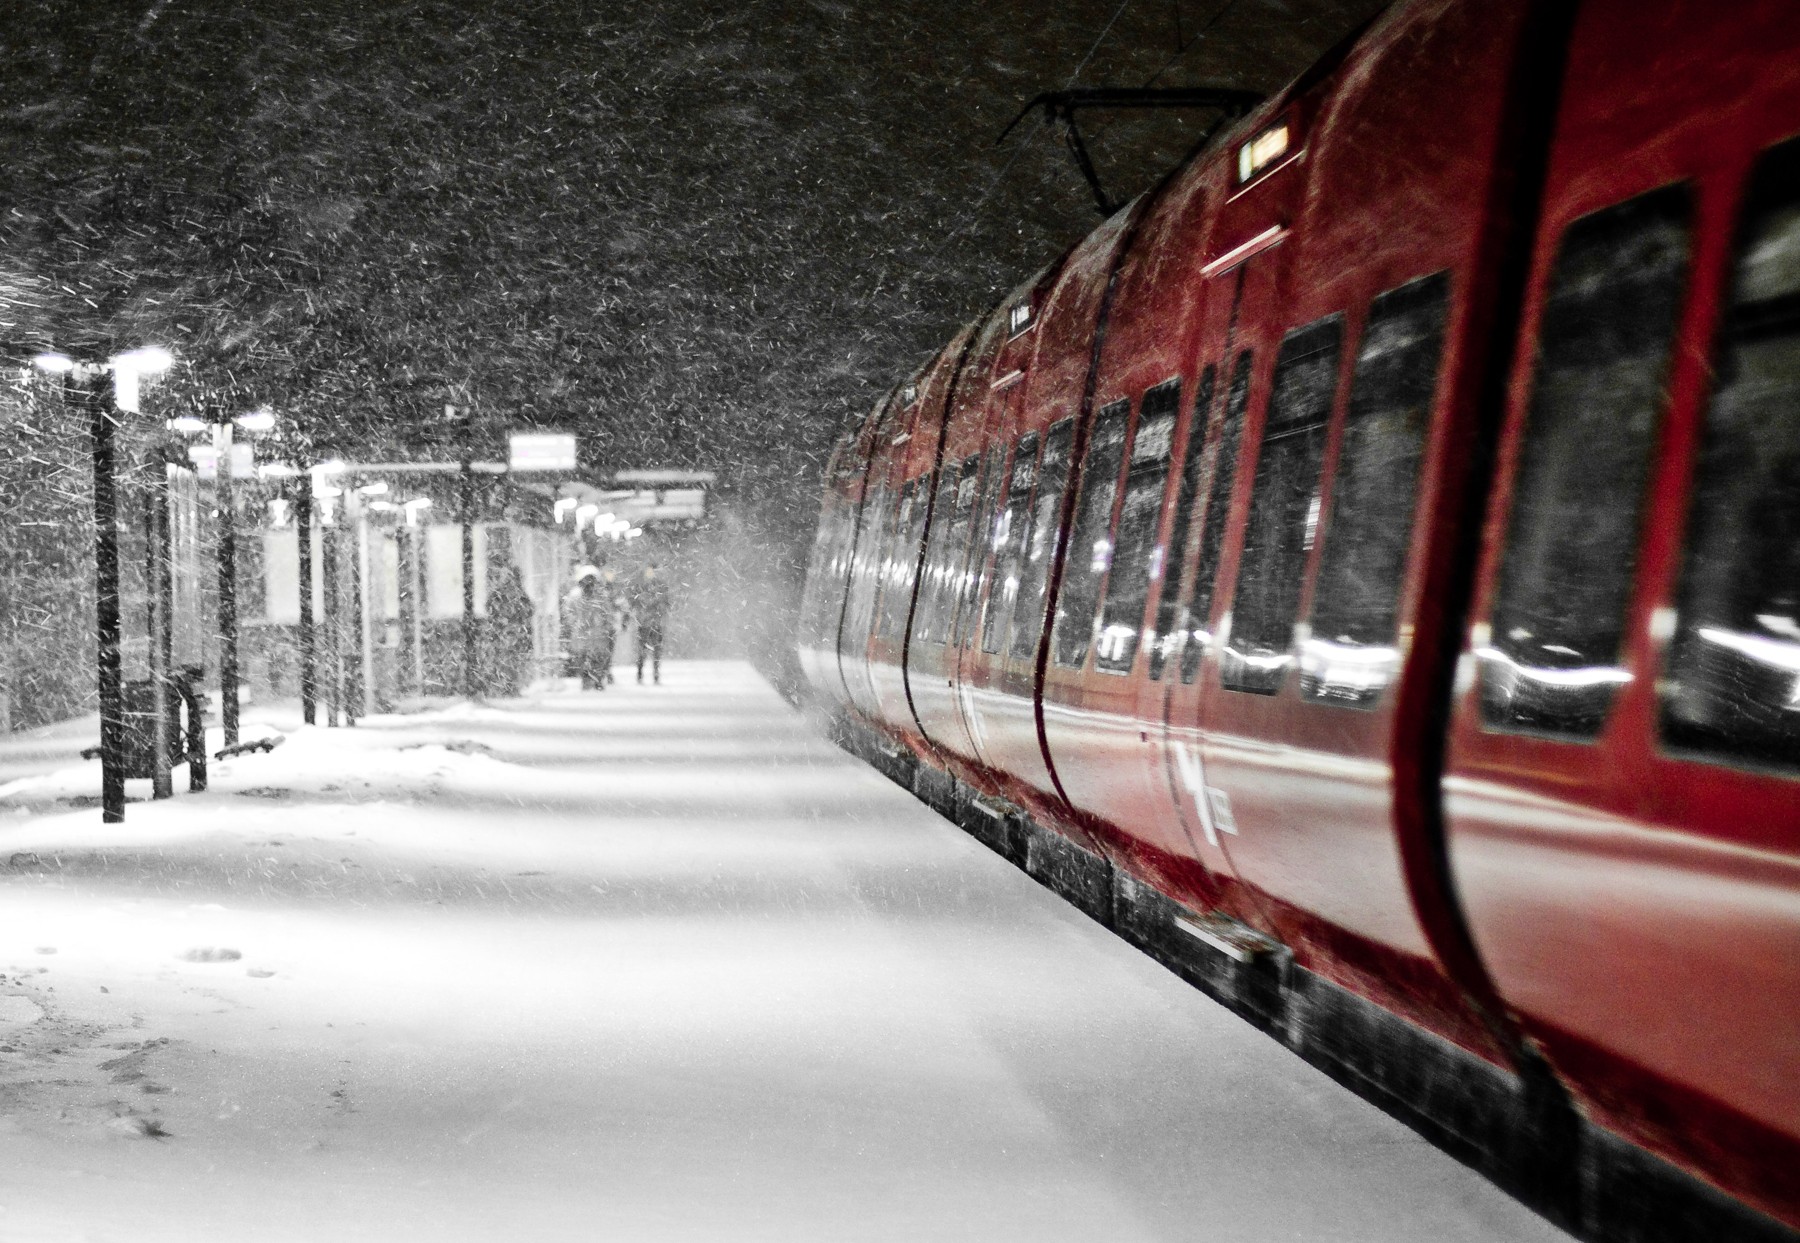 General 1800x1243 snow vehicle train night winter cold outdoors selective coloring